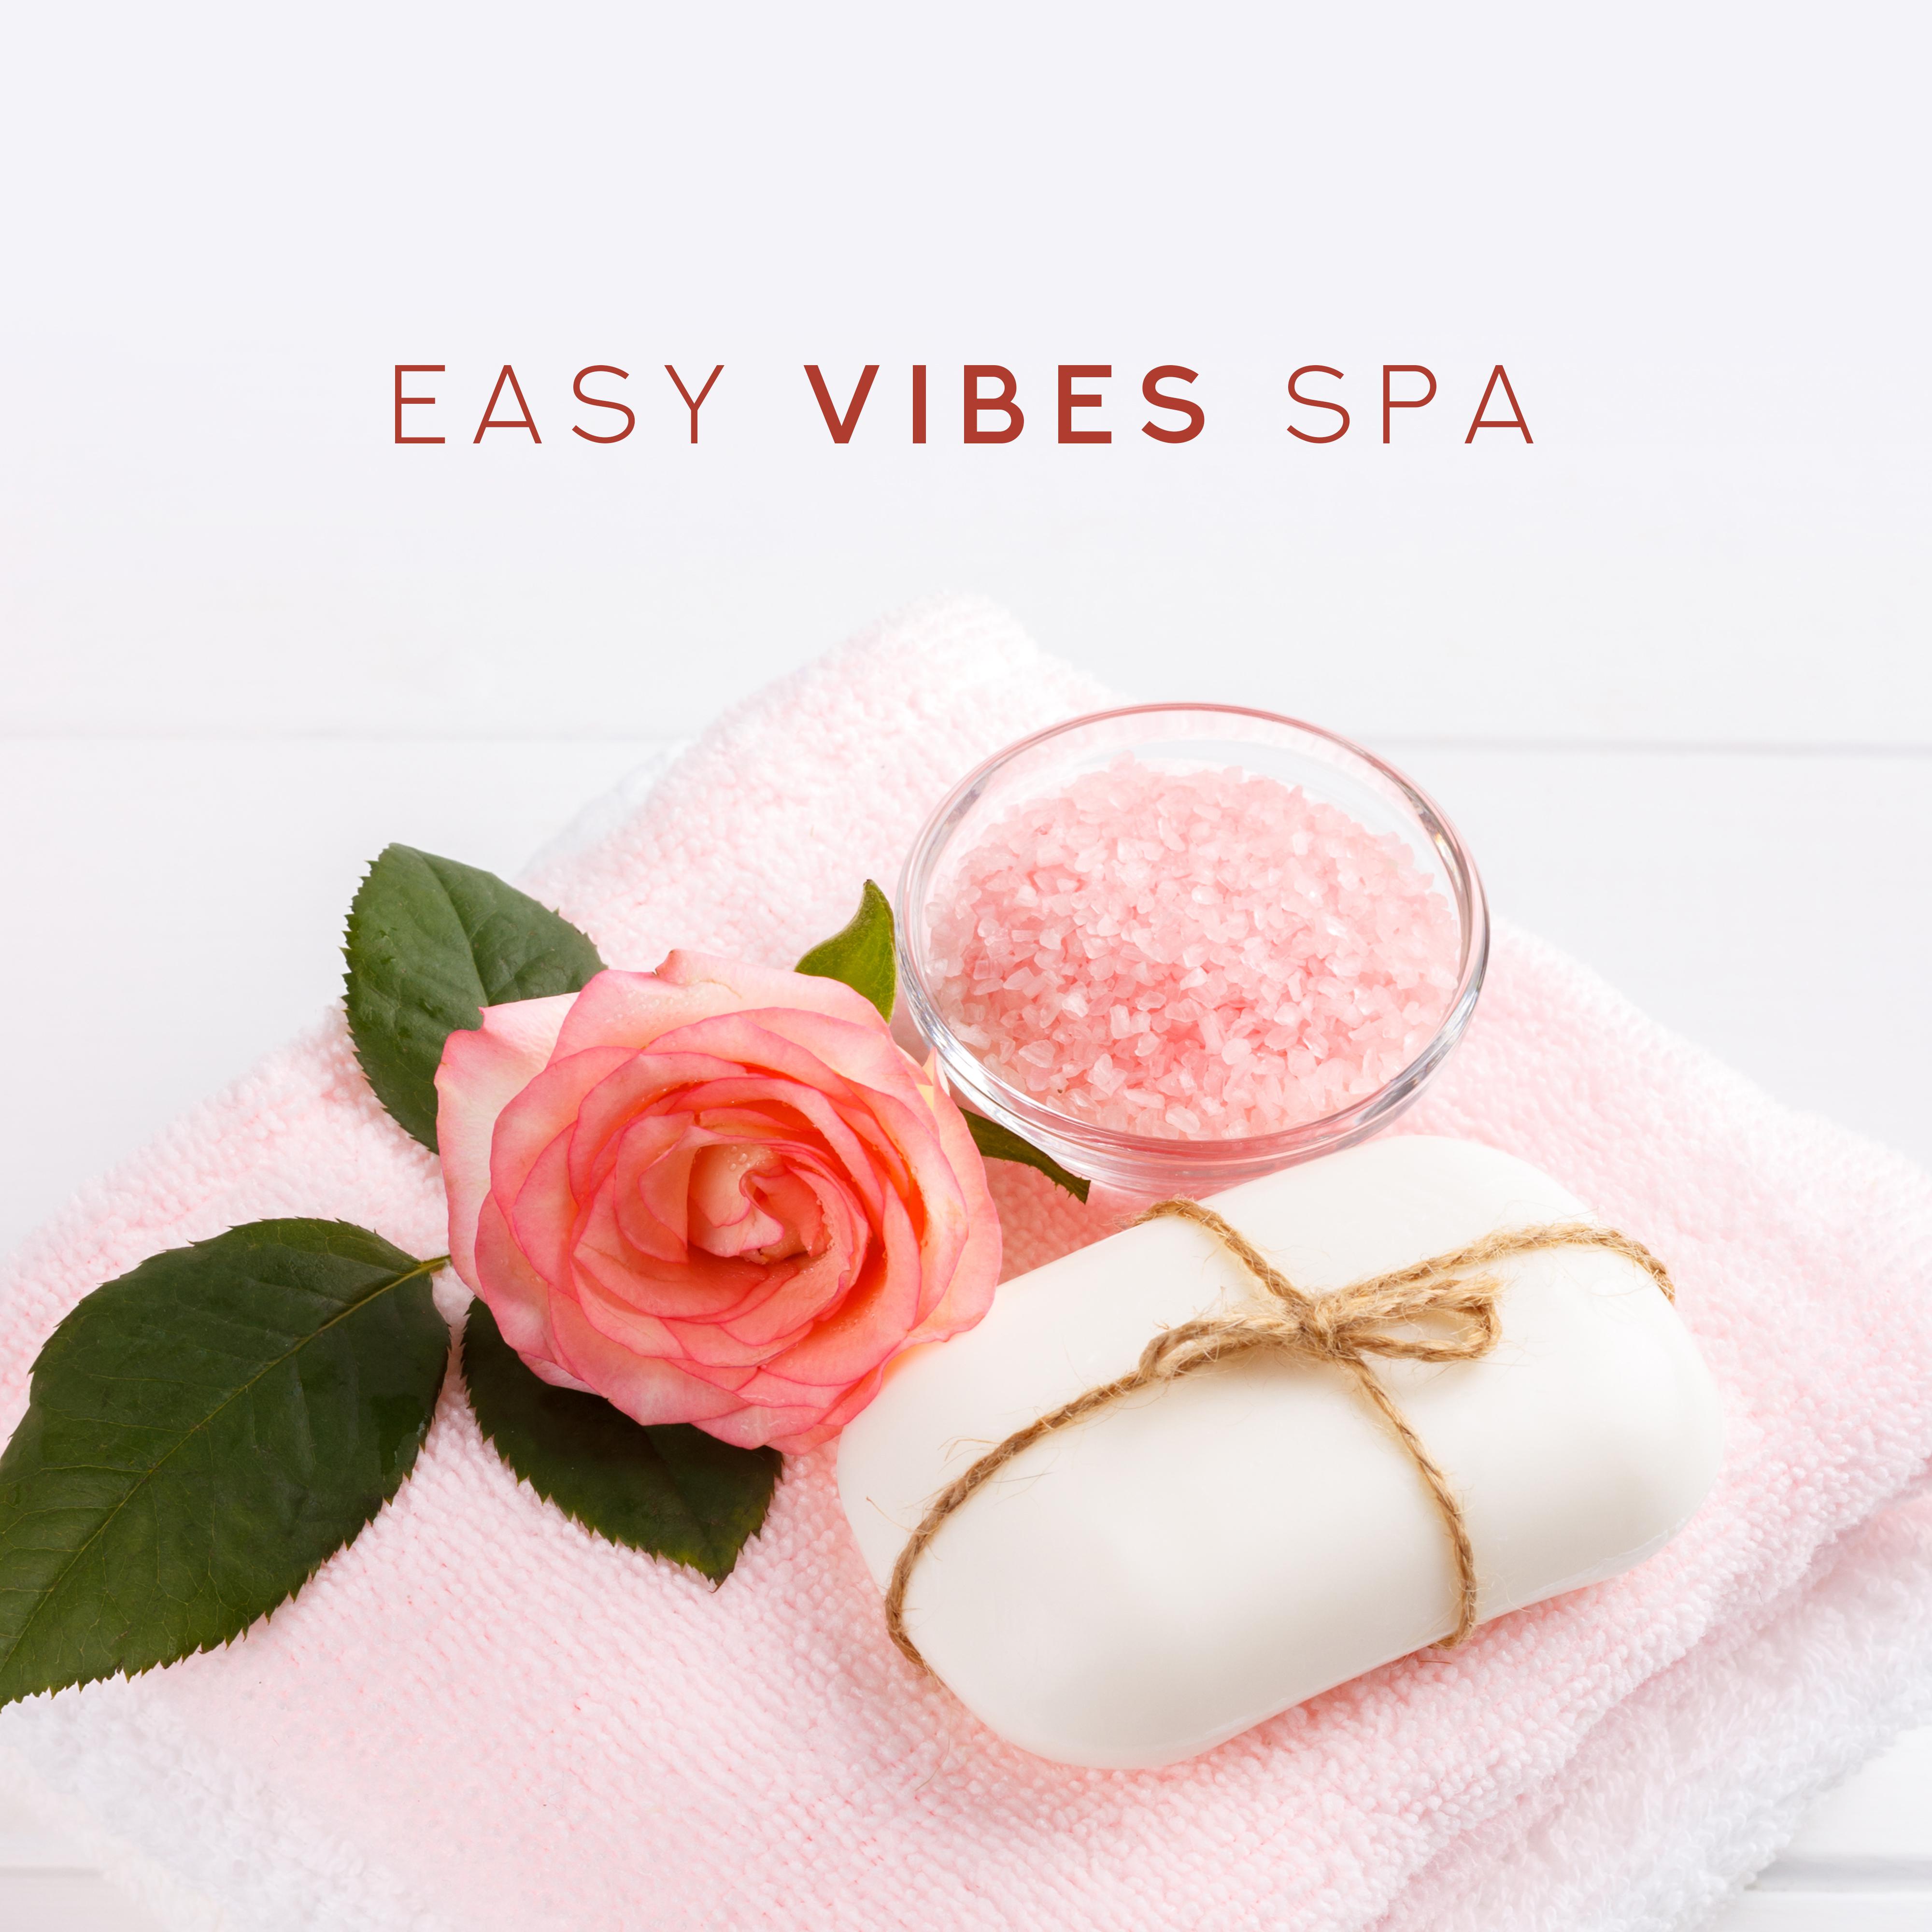 Easy Vibes Spa: Zen Lounge, New Age Music for Massage, Spa & Wellness, Sleep, Relax, Inner Harmony